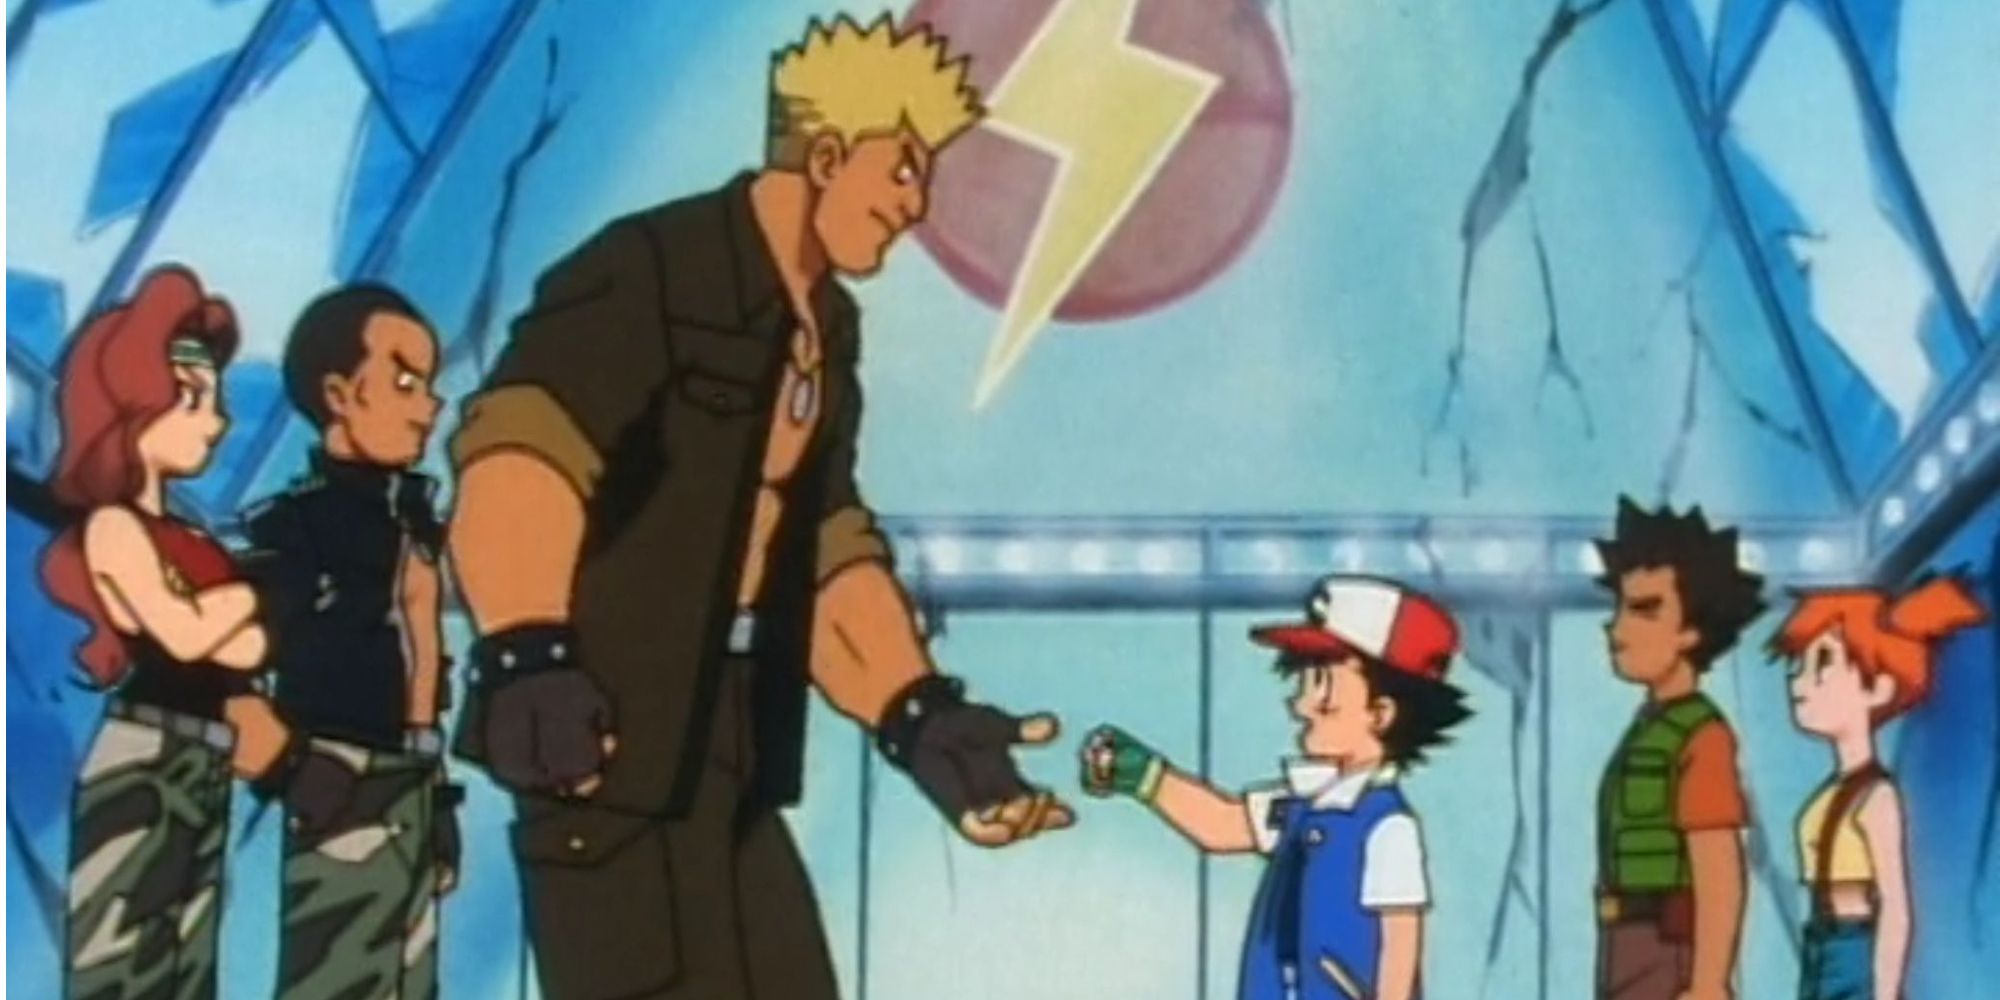 Ash getting badge from Lt Surge